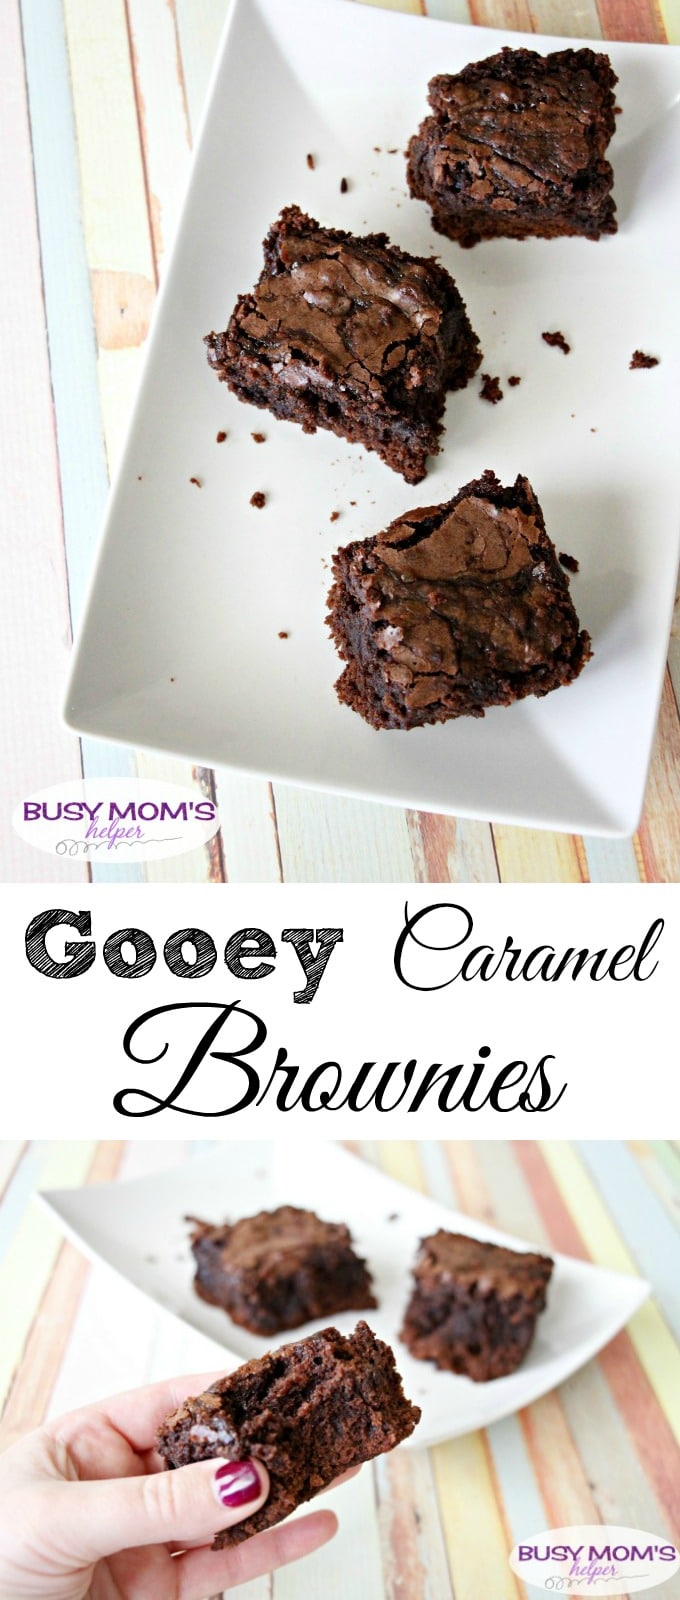 Gooey Caramel Brownies / by BusyMomsHelper.com / a delicious and simple dessert recipe